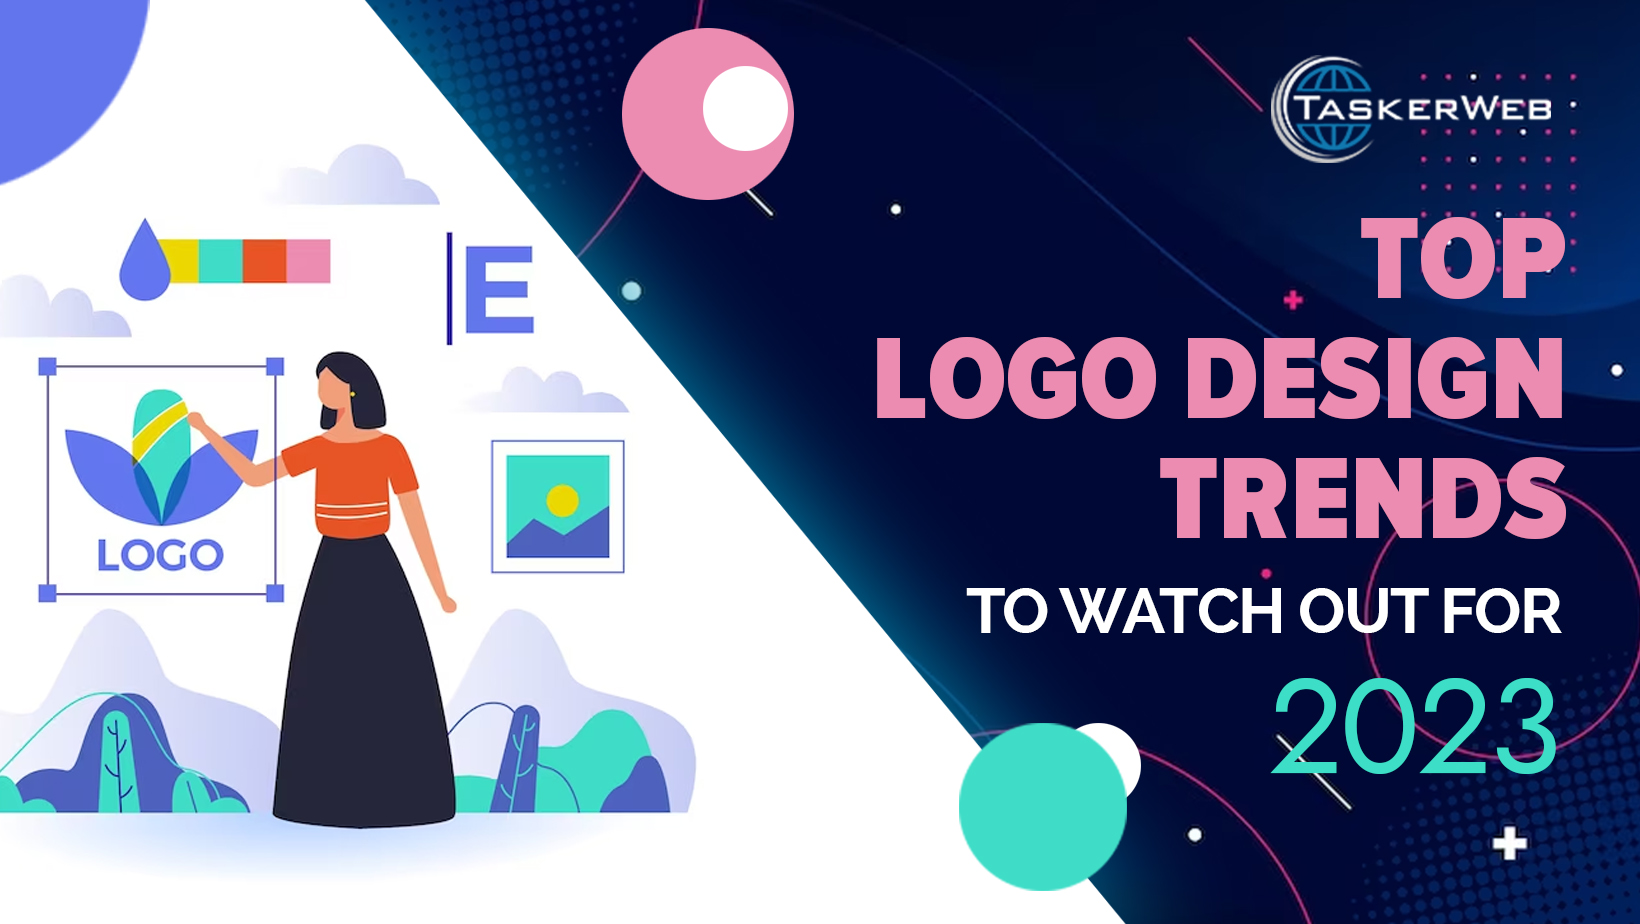 Top Logo Design Trends To Watch Out For 2023